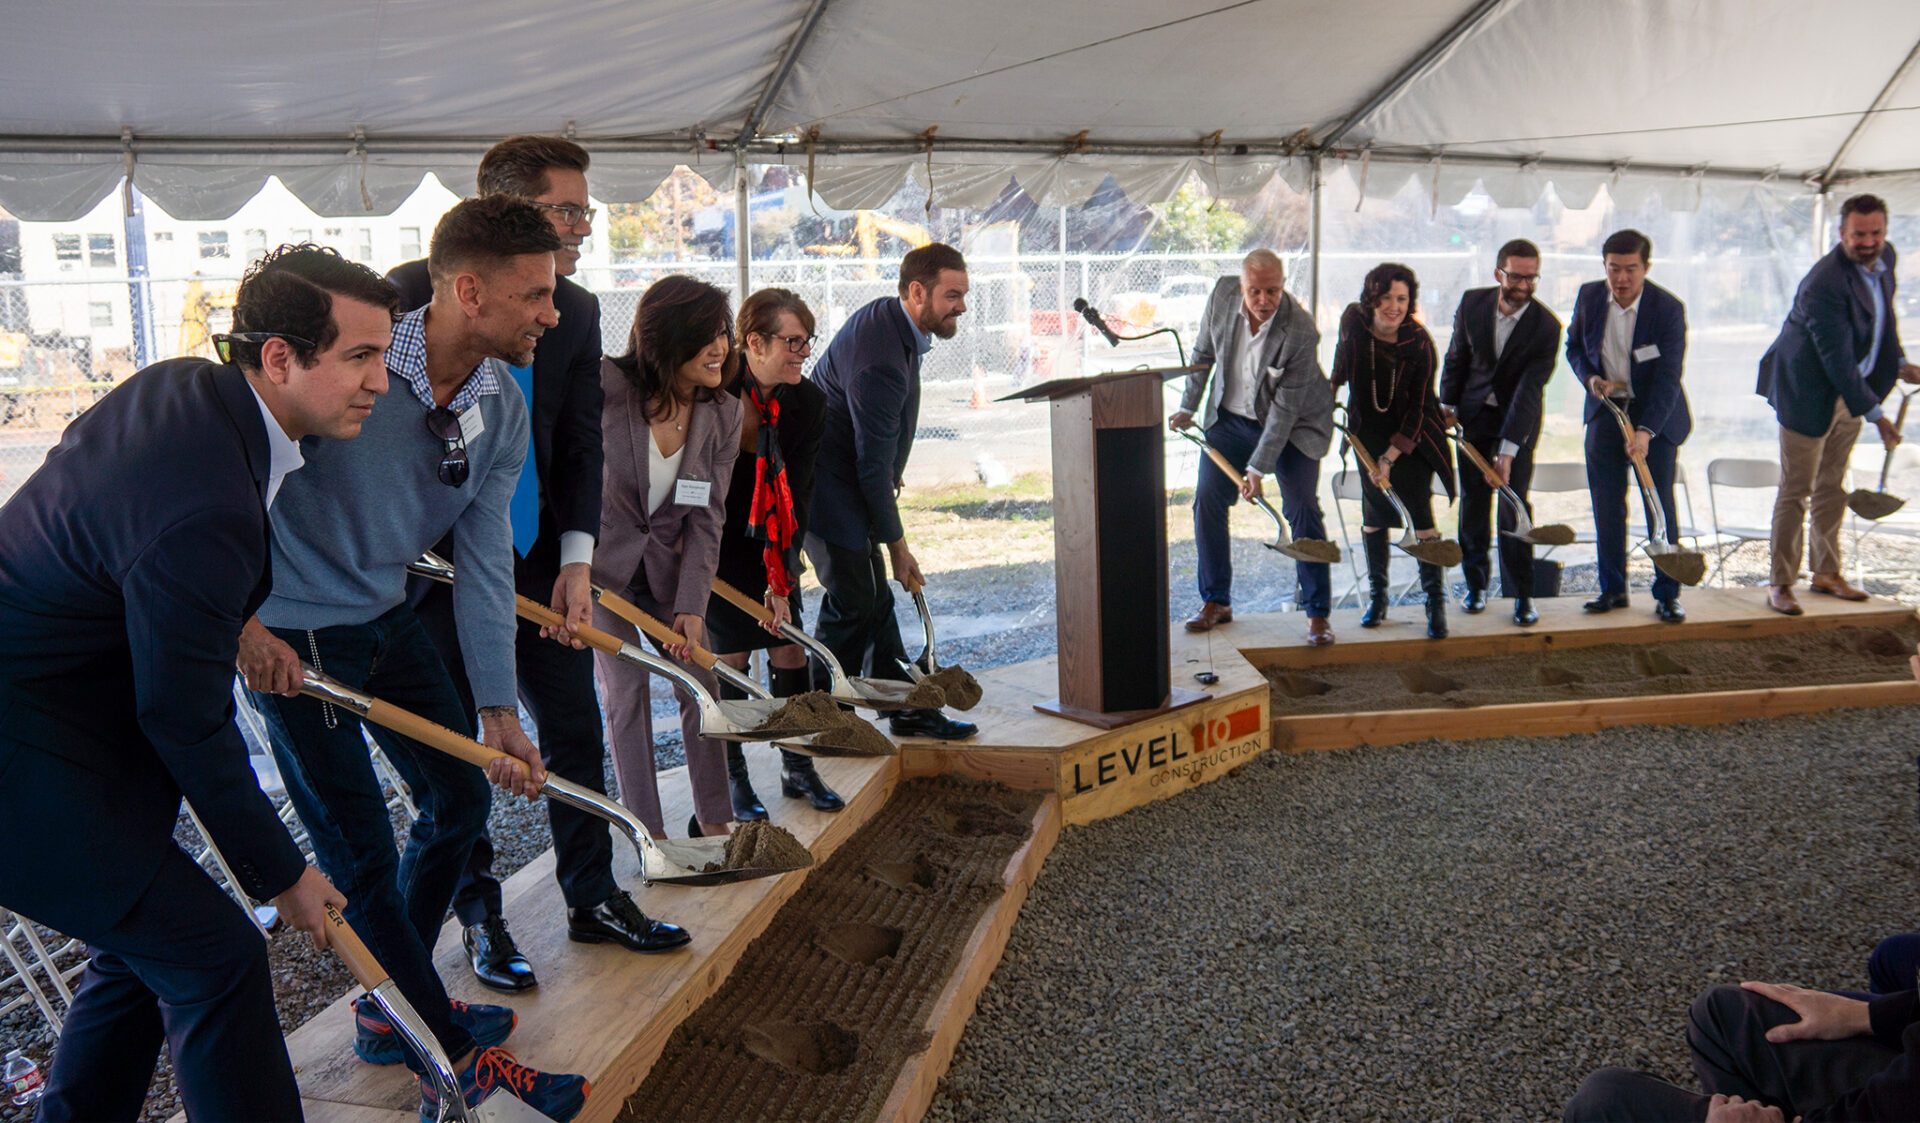 Breaking Ground for Development with 270 Affordable Rental Homes for Households with Lower Income or Experiencing Homelessness